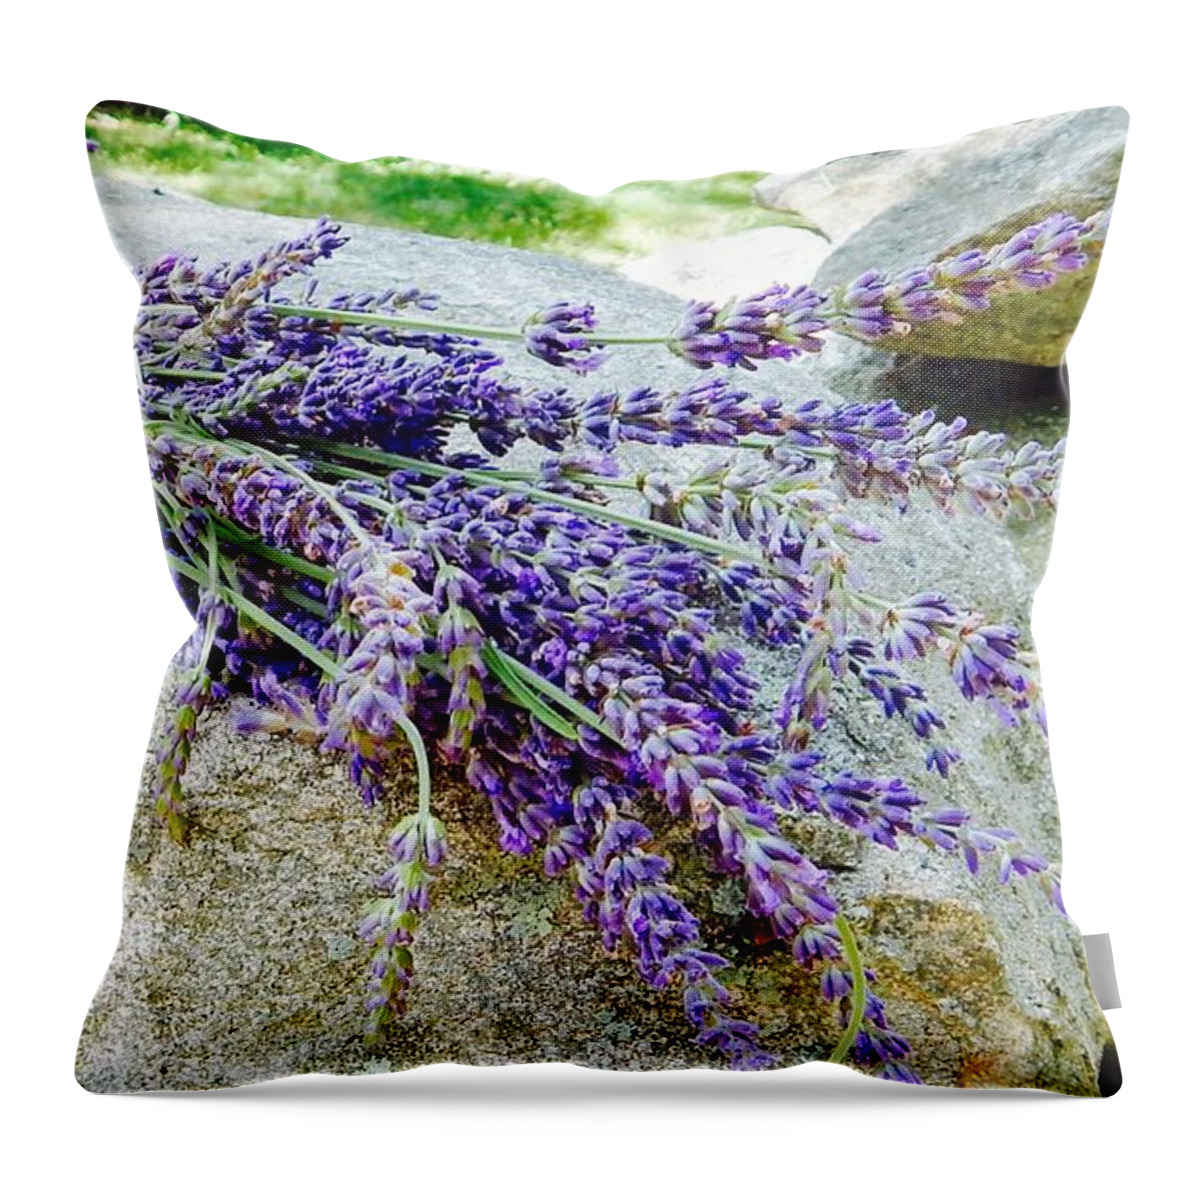 Lavender Throw Pillow featuring the photograph Sitting lavender by Sue Morris